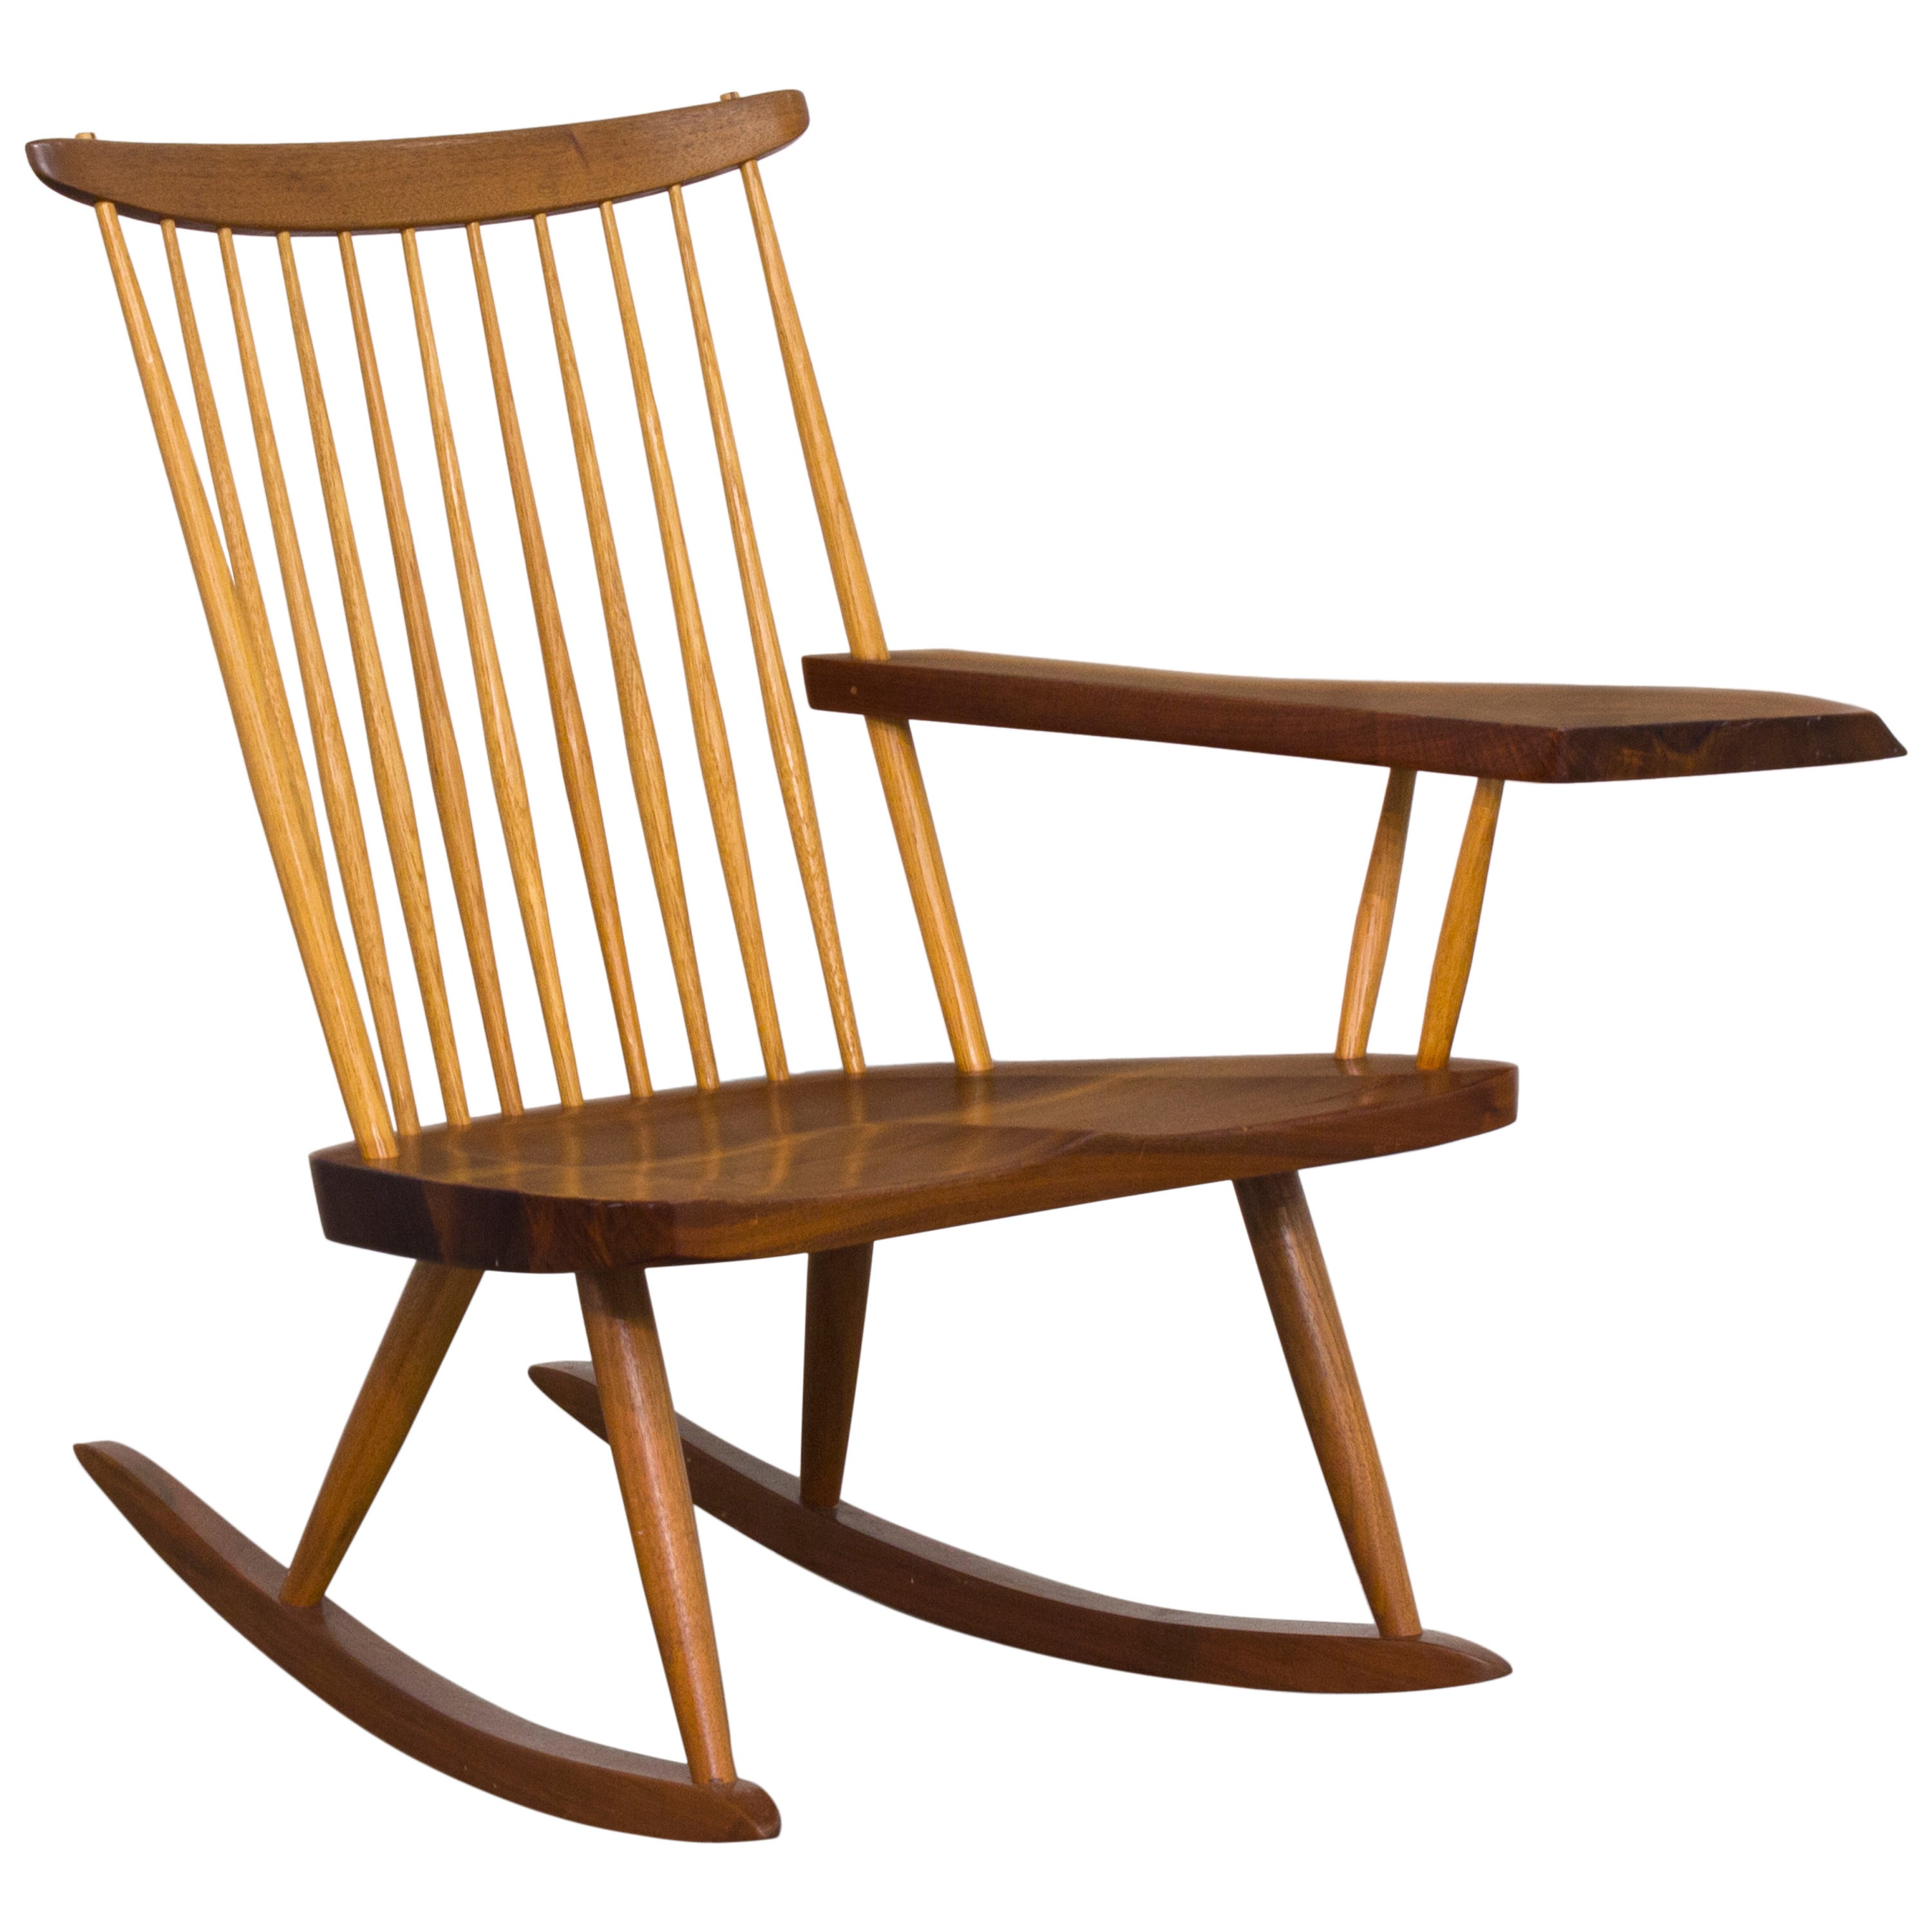 One-Armed Rocking Chair by George Nakashima, 1978